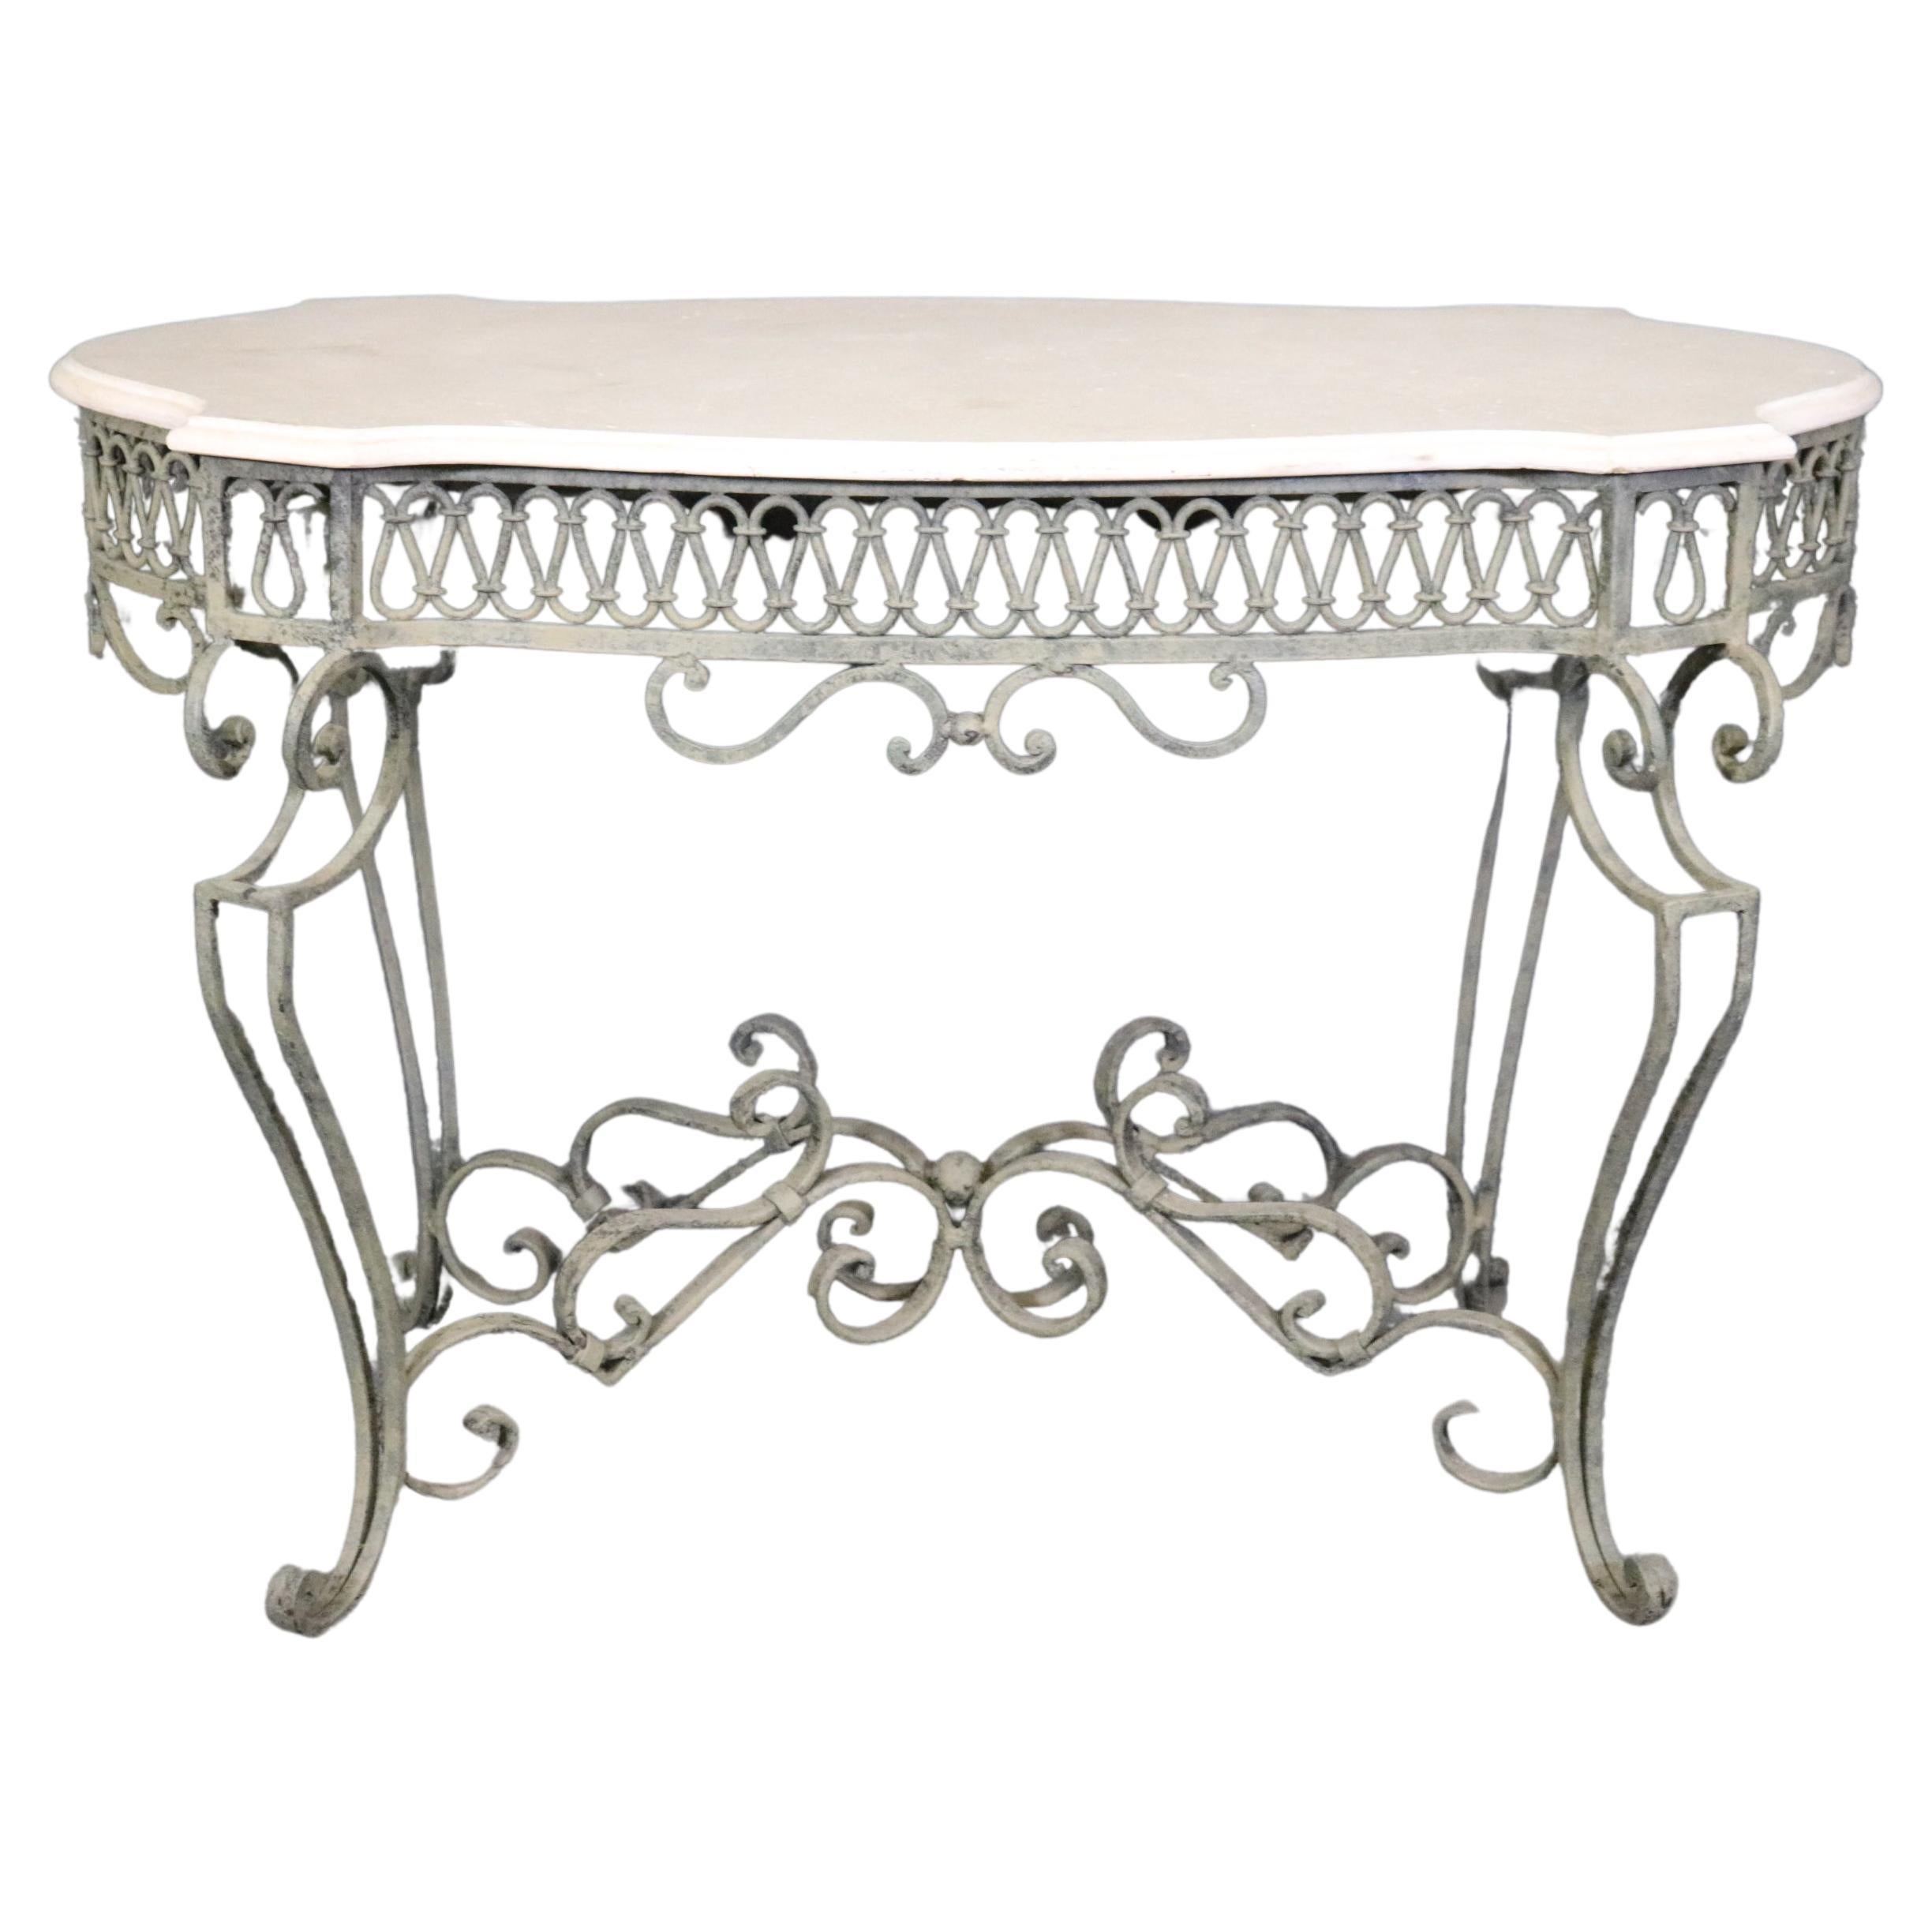 Wrought Iron Regency Style Travertine Top Center Table